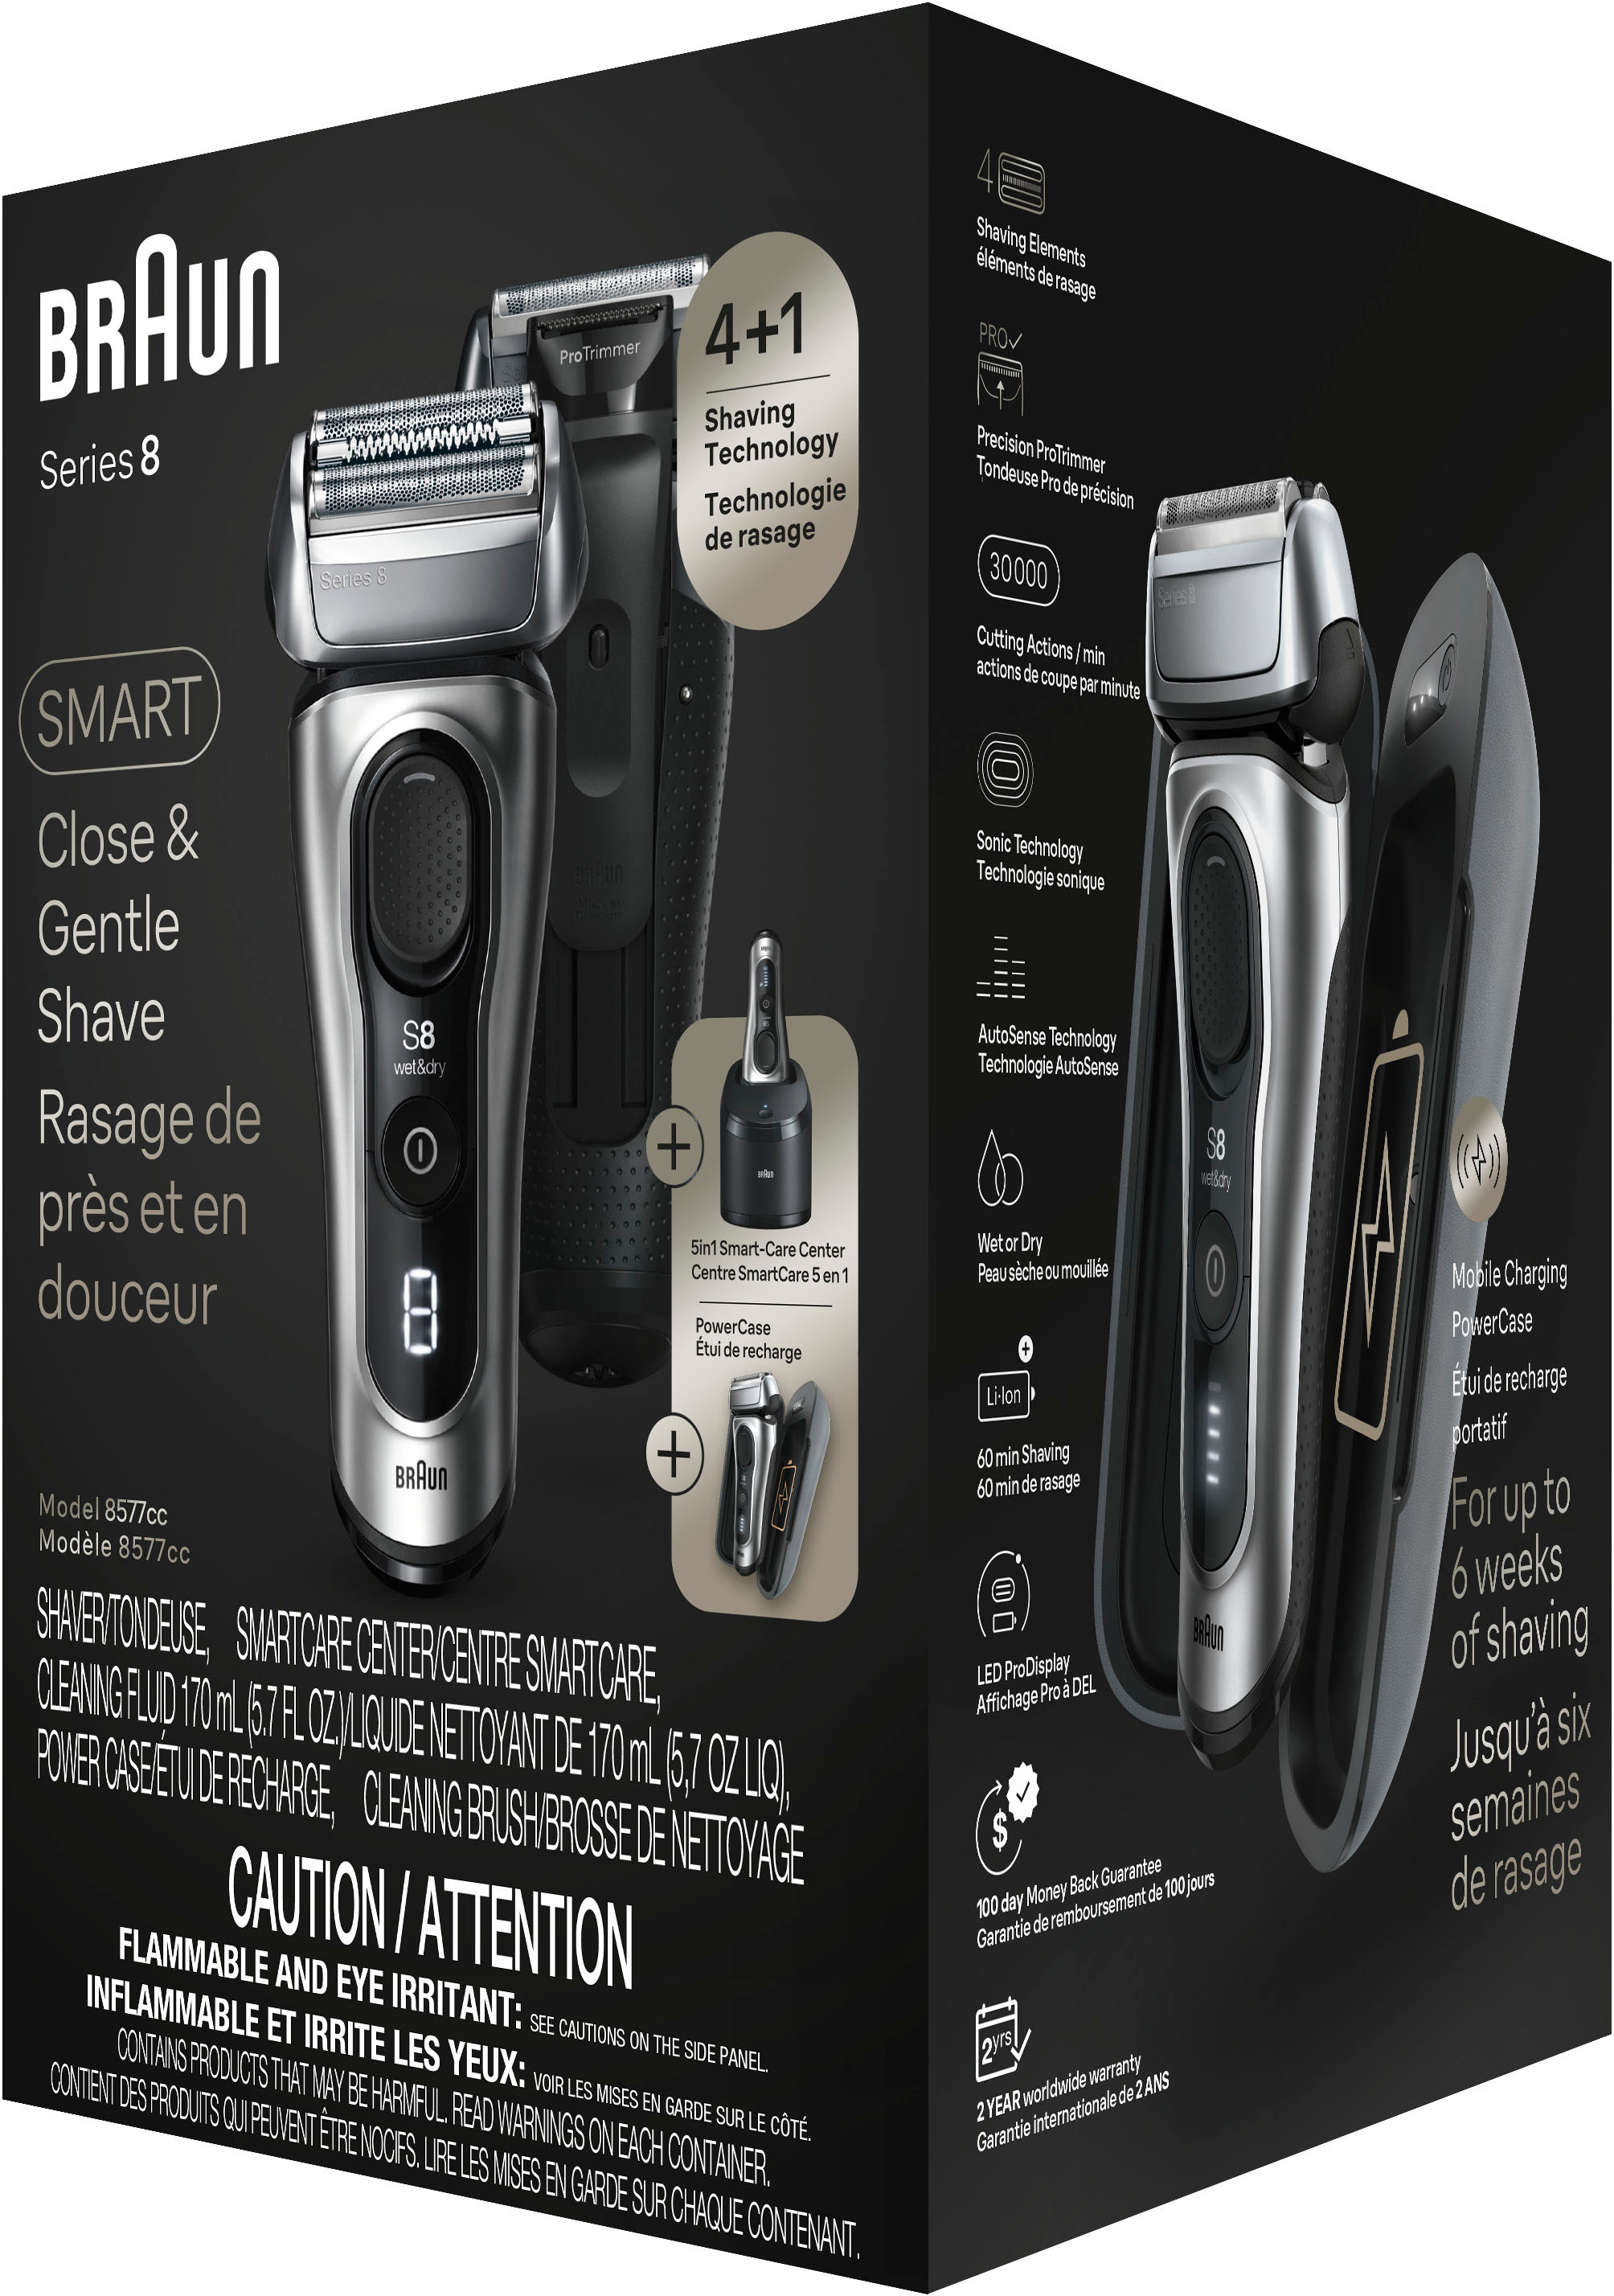 Braun Men's Series 8 Electric Shaver with Powercase and 5-in-1 Smartcare Center (8577CC)